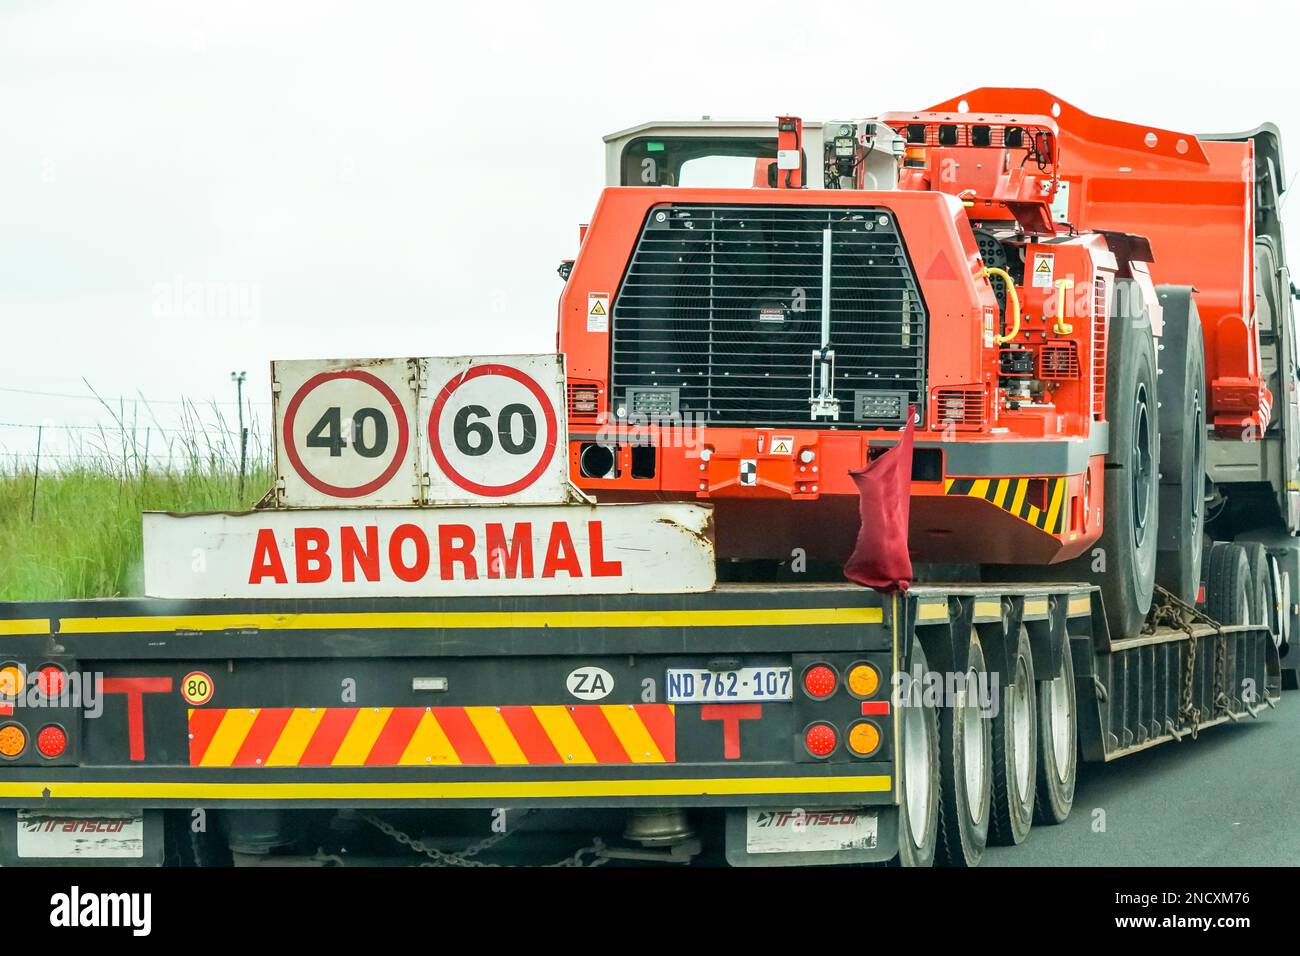 Abnormal truck load with a heavy vehicle or machine on a trailer in South Africa concept transport and industry Stock Photo